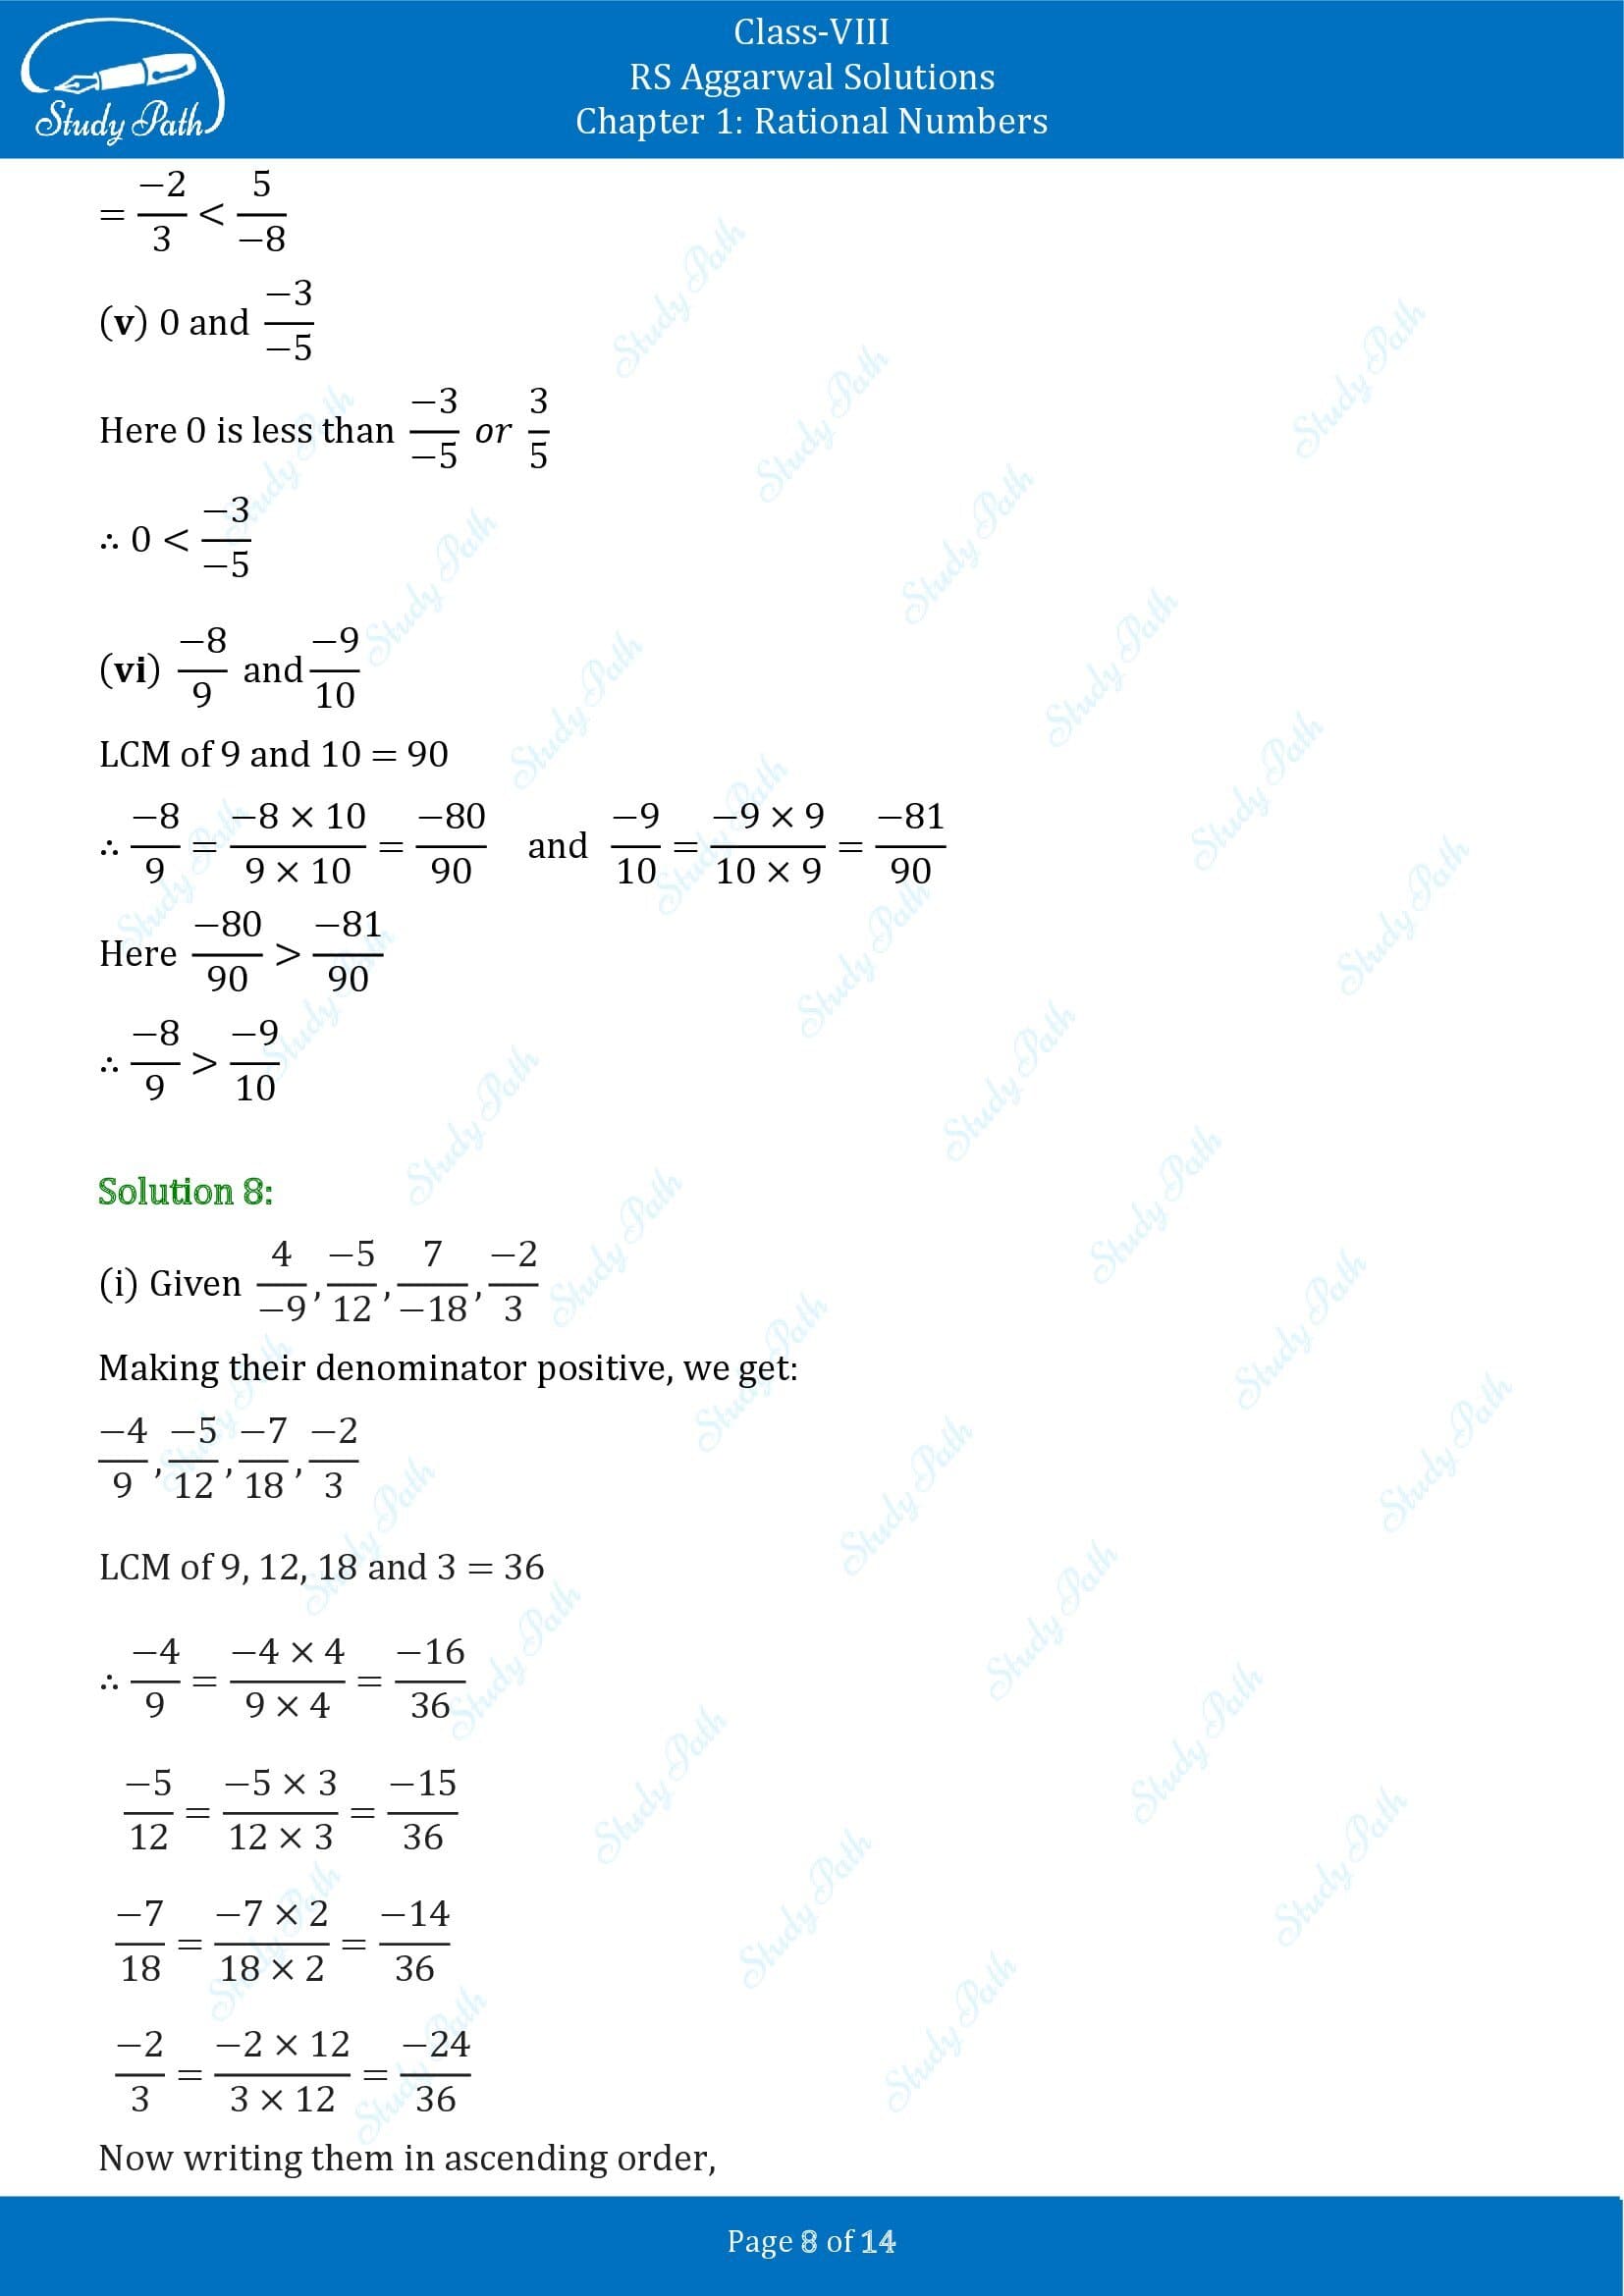 RS Aggarwal Solutions Class 8 Chapter 1 Rational Numbers Exercise 1A 00008